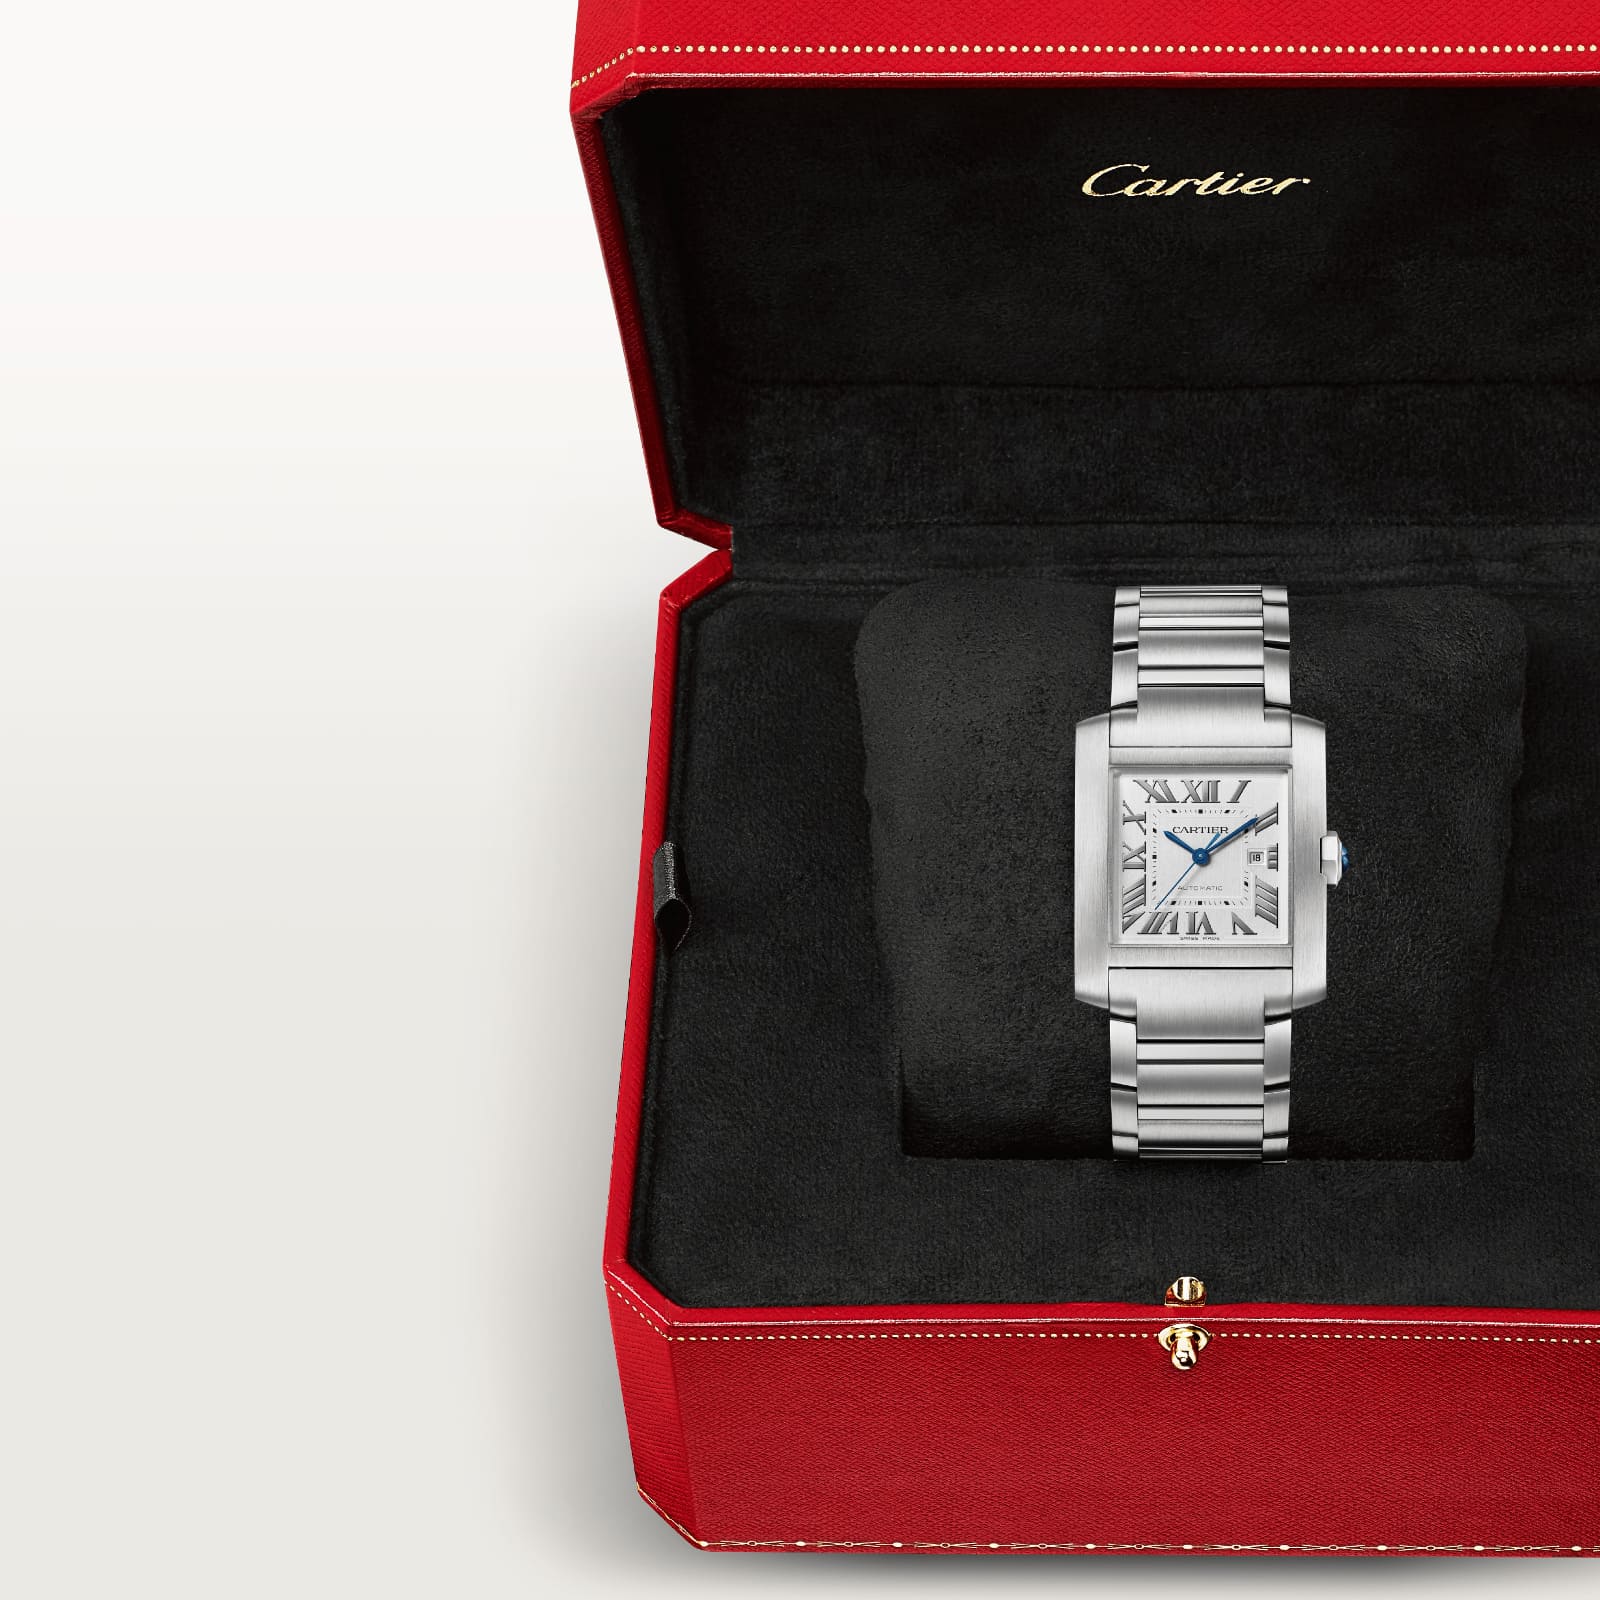 Cartier Tank Francaise Grosses Modell in Cartier Verpackung